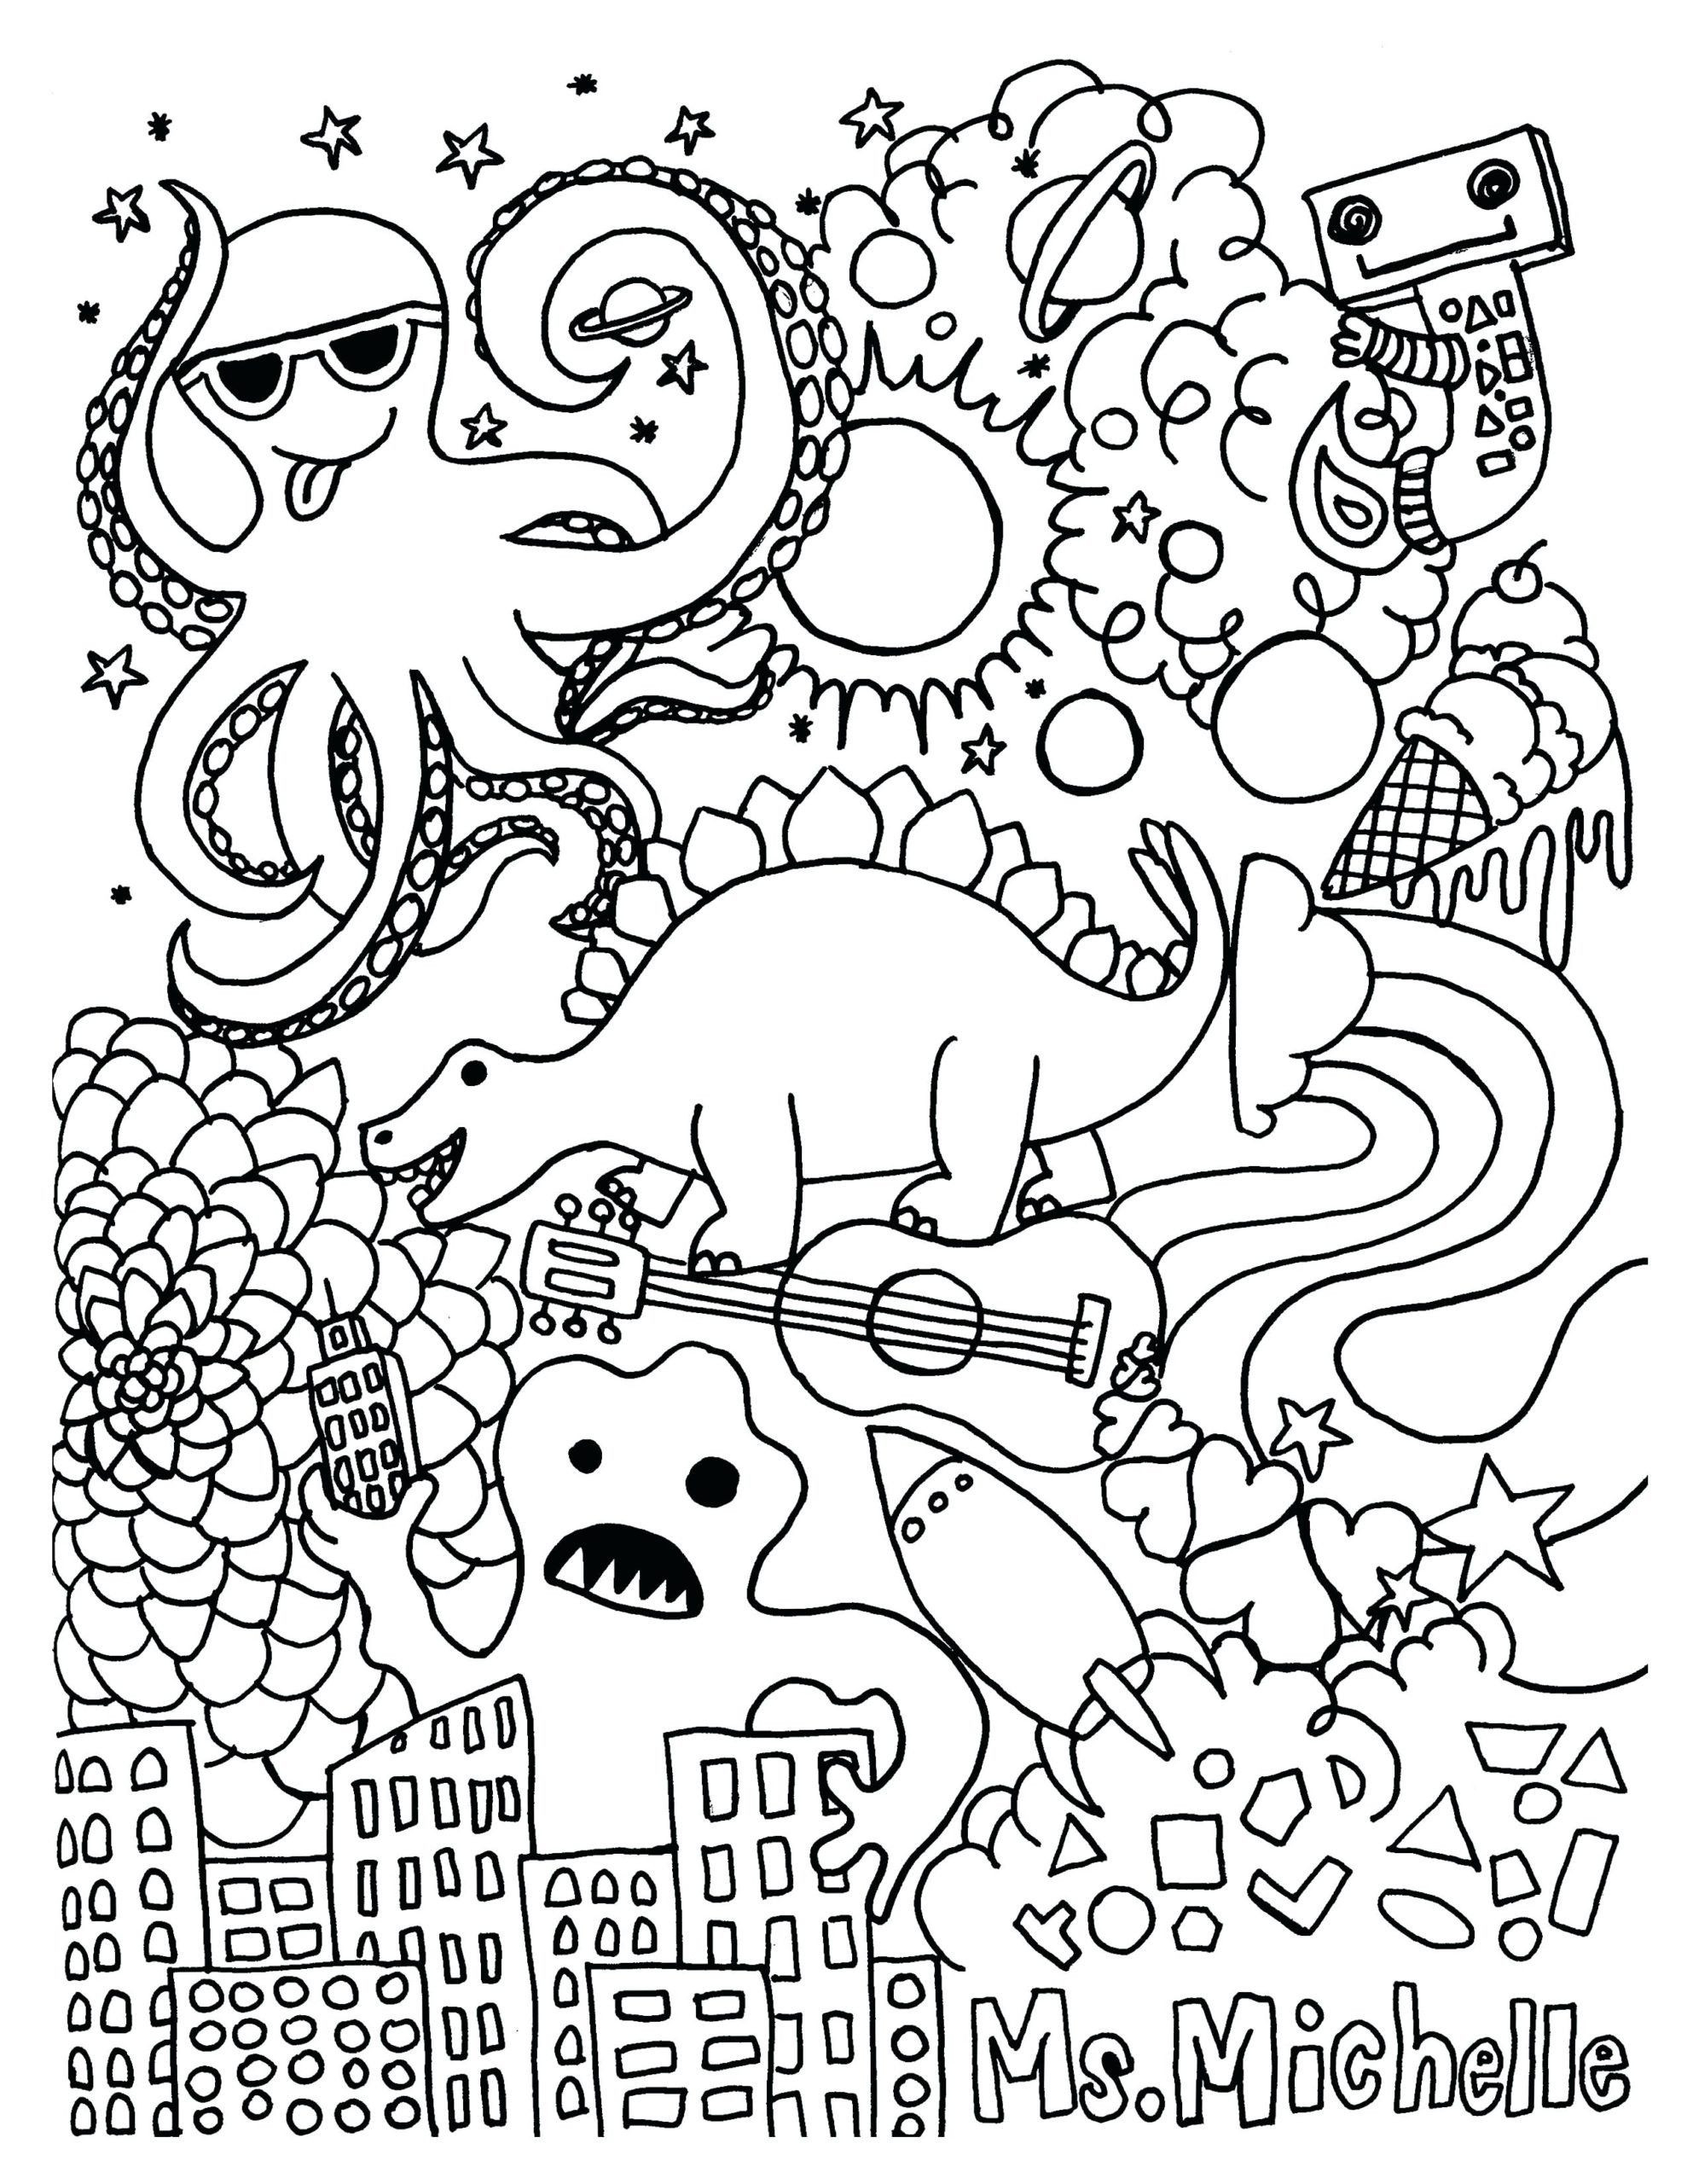 Coloring Pages : Free Halloween Coloring Sheets New 7